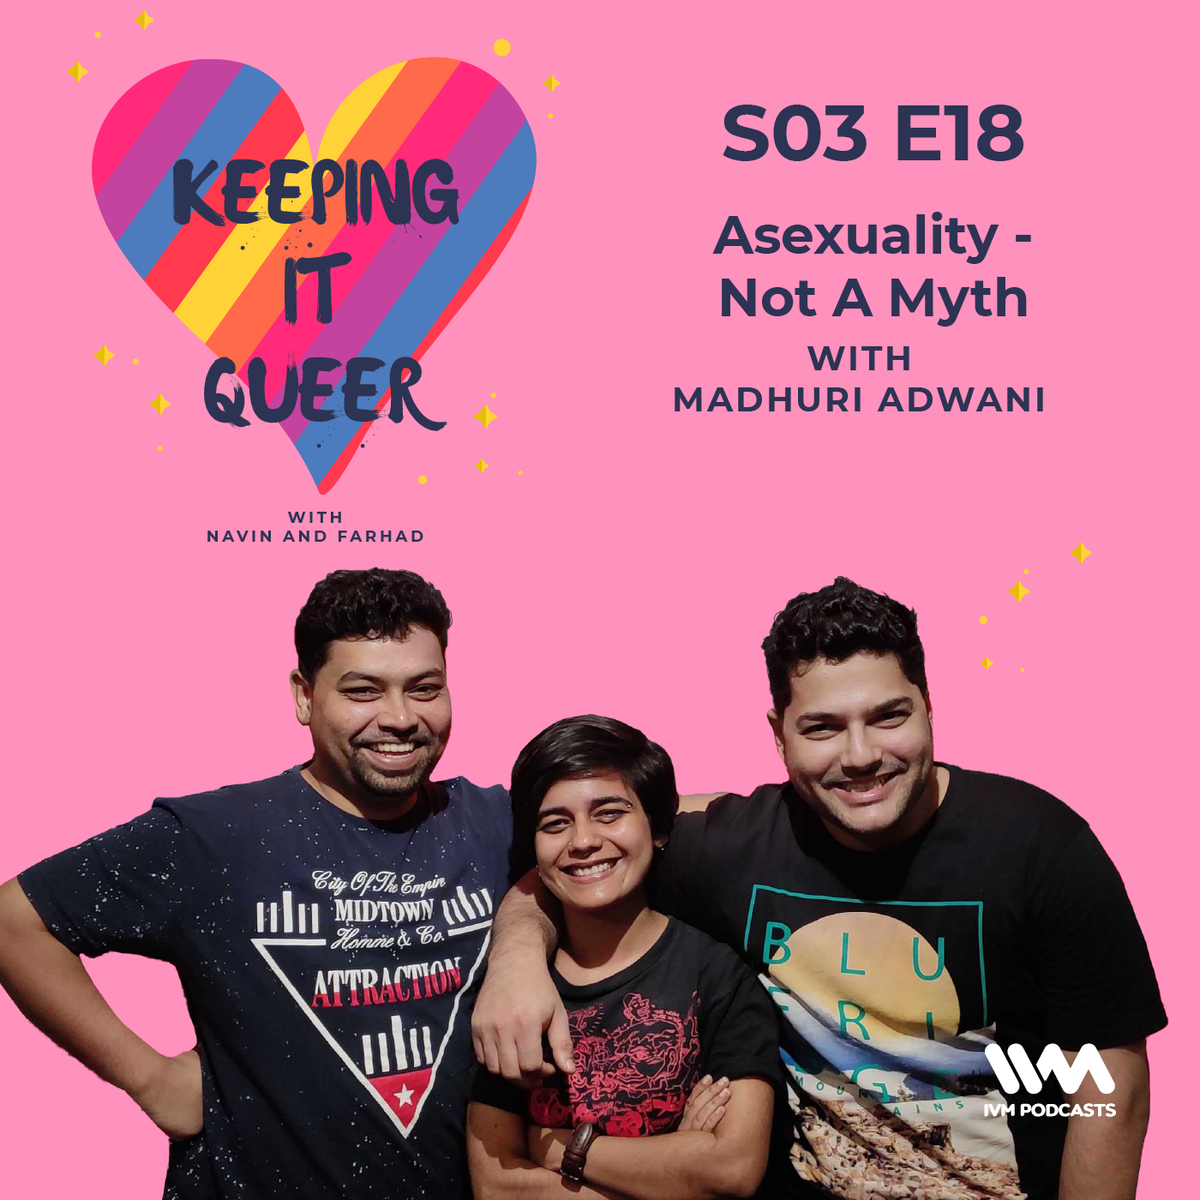 S03 E18: Asexuality - Not A Myth